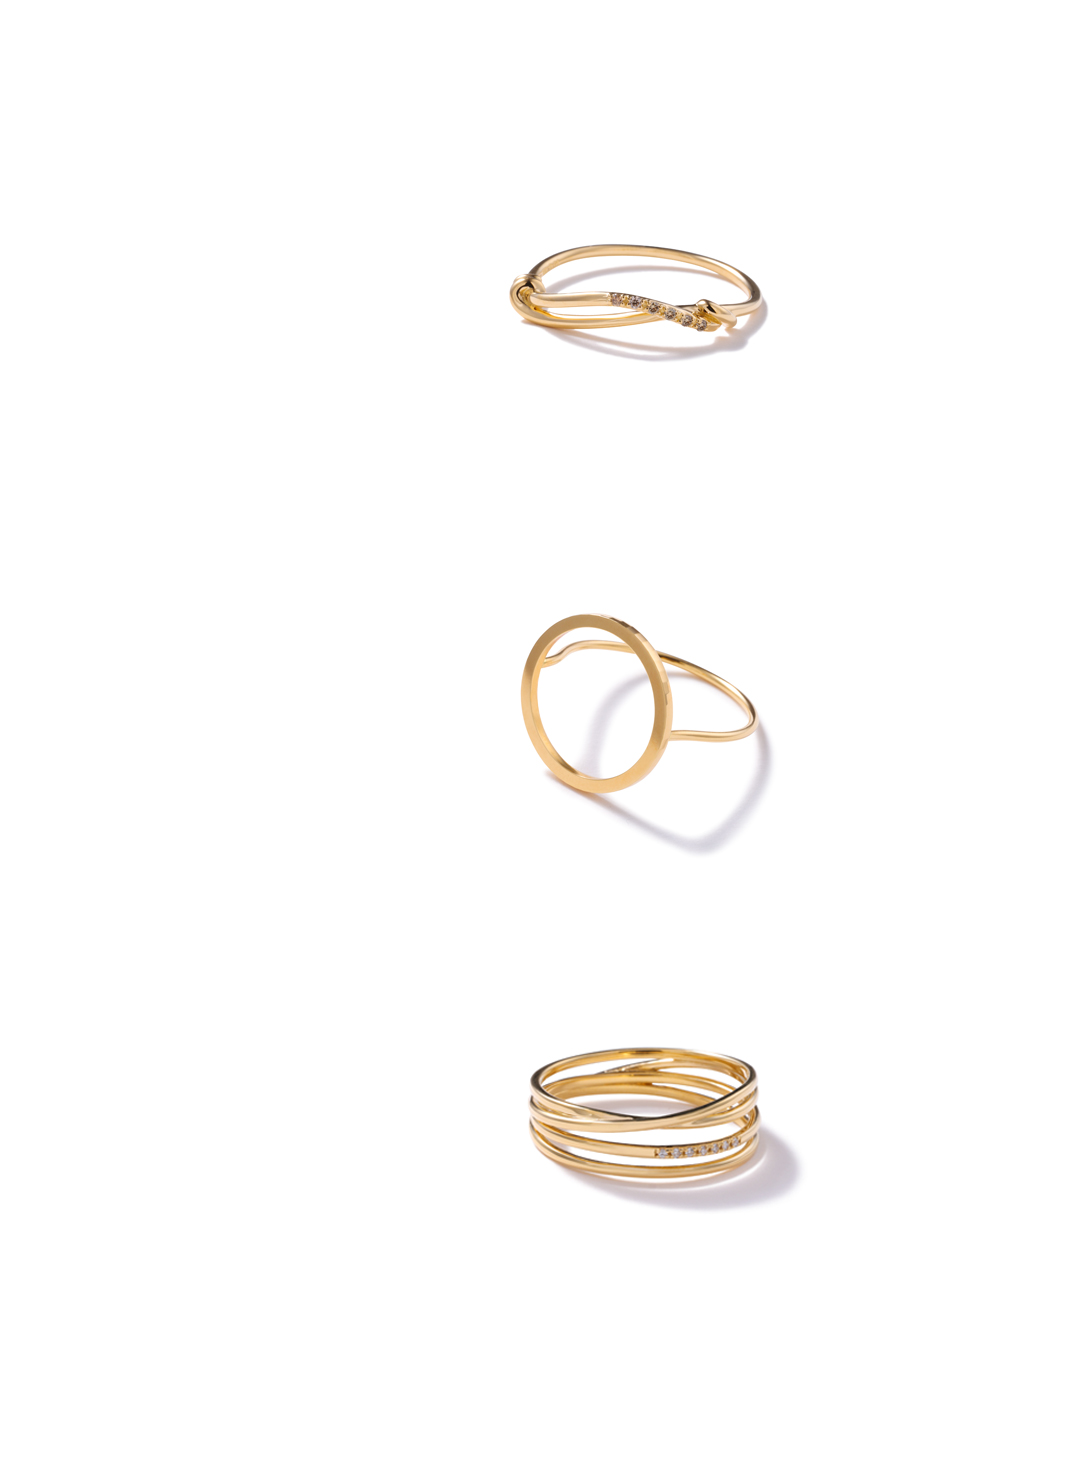 Iconic Rings to Spice Up Your New Look